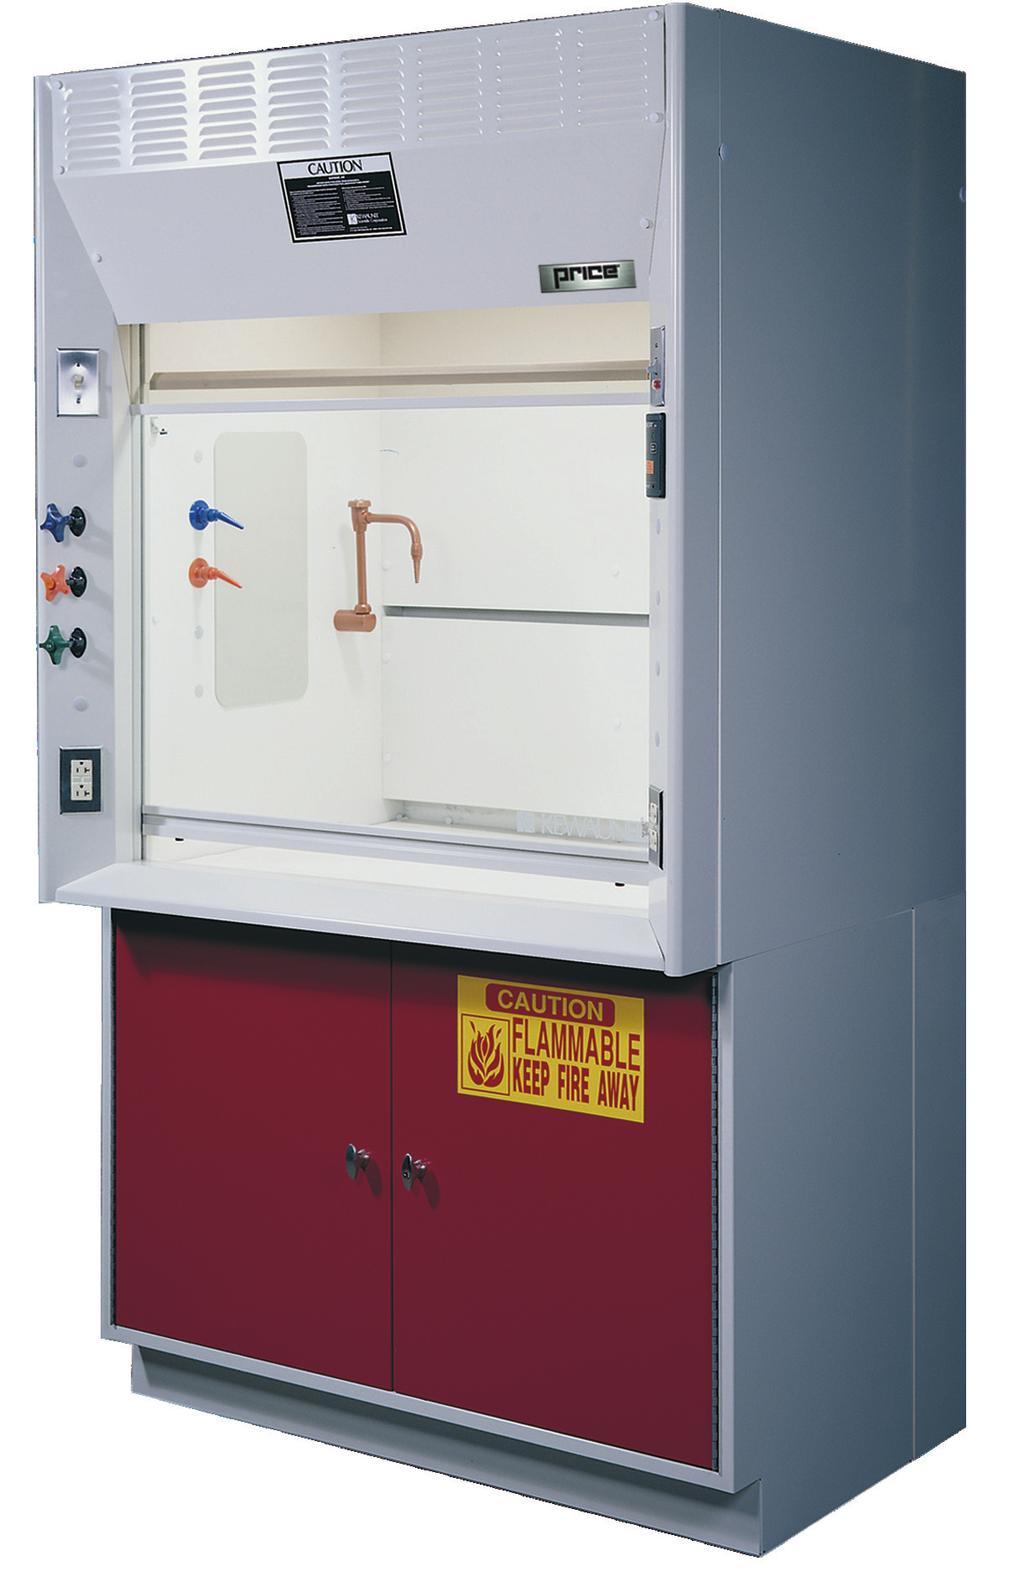 FUME HOODS Chemical Fume Hood Features Chemical Fume Hoods are designed with a rigid frame construction that assures solid installation and low vibration and sound levels.